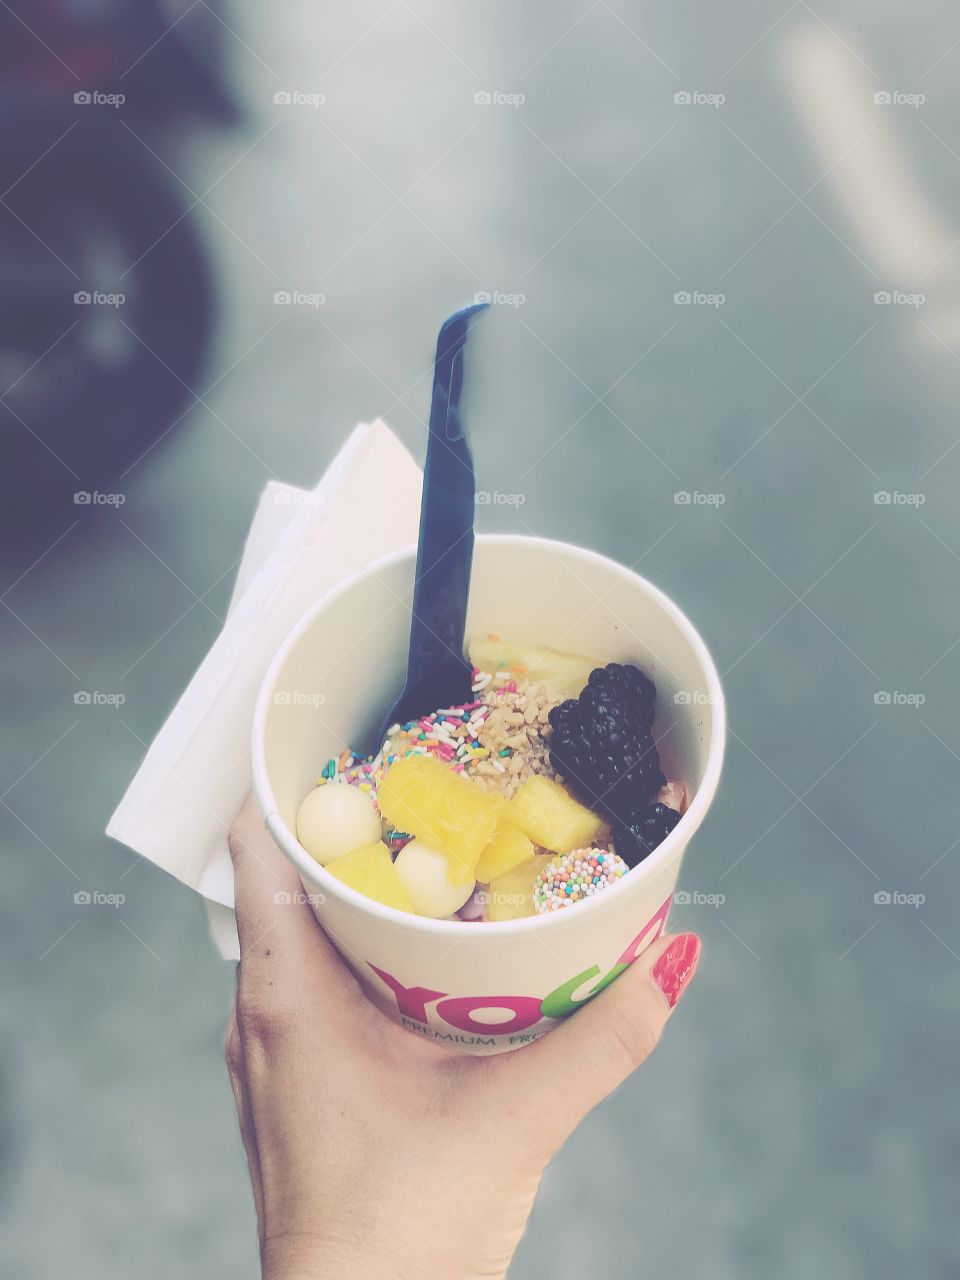 I can give my soul for frozen yogurt hot day